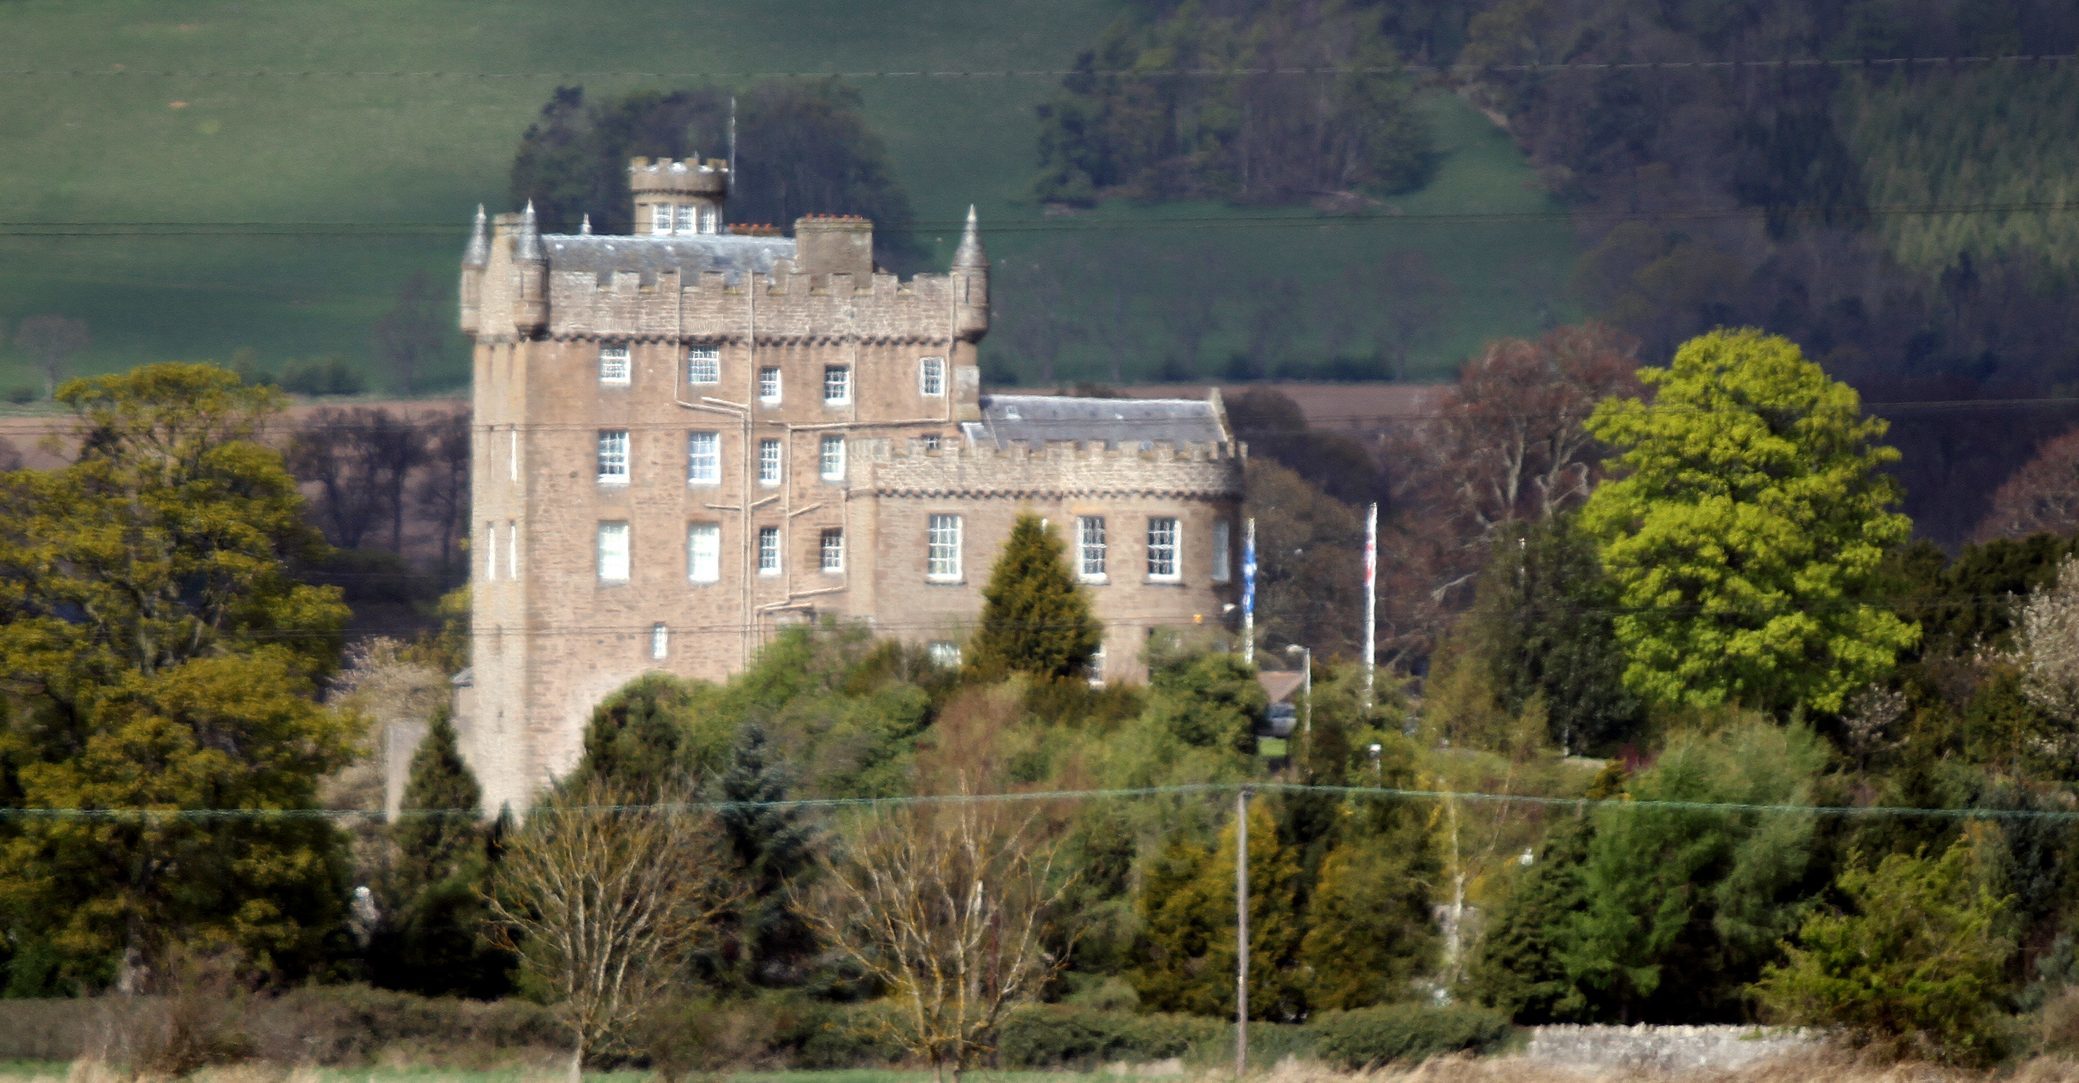 Touati died in Castle Huntly.